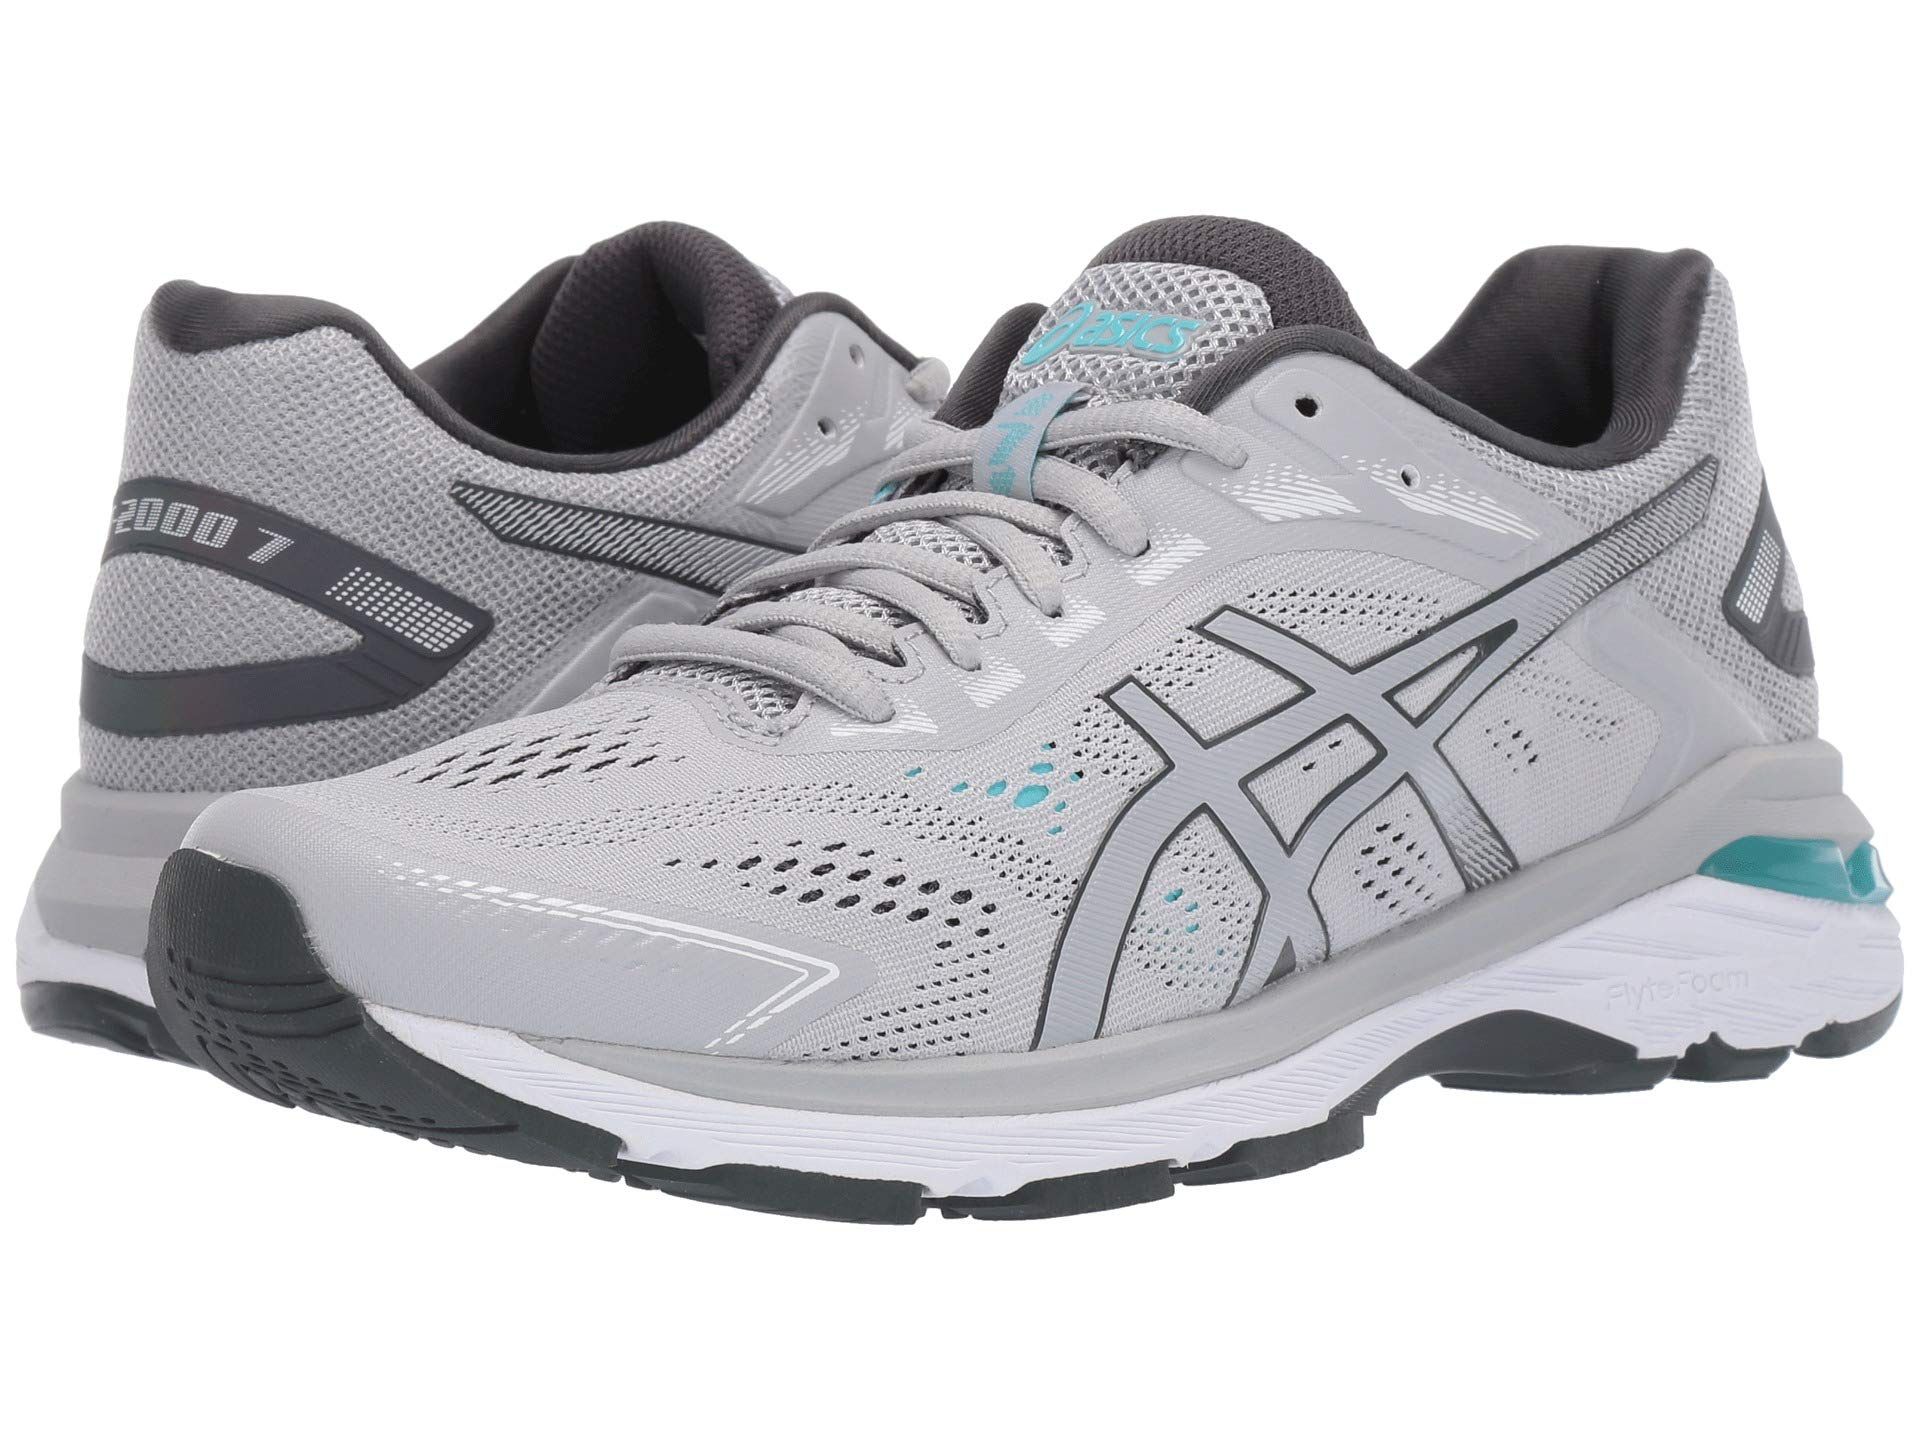 Asics Running Shoes on Sale at Zappos